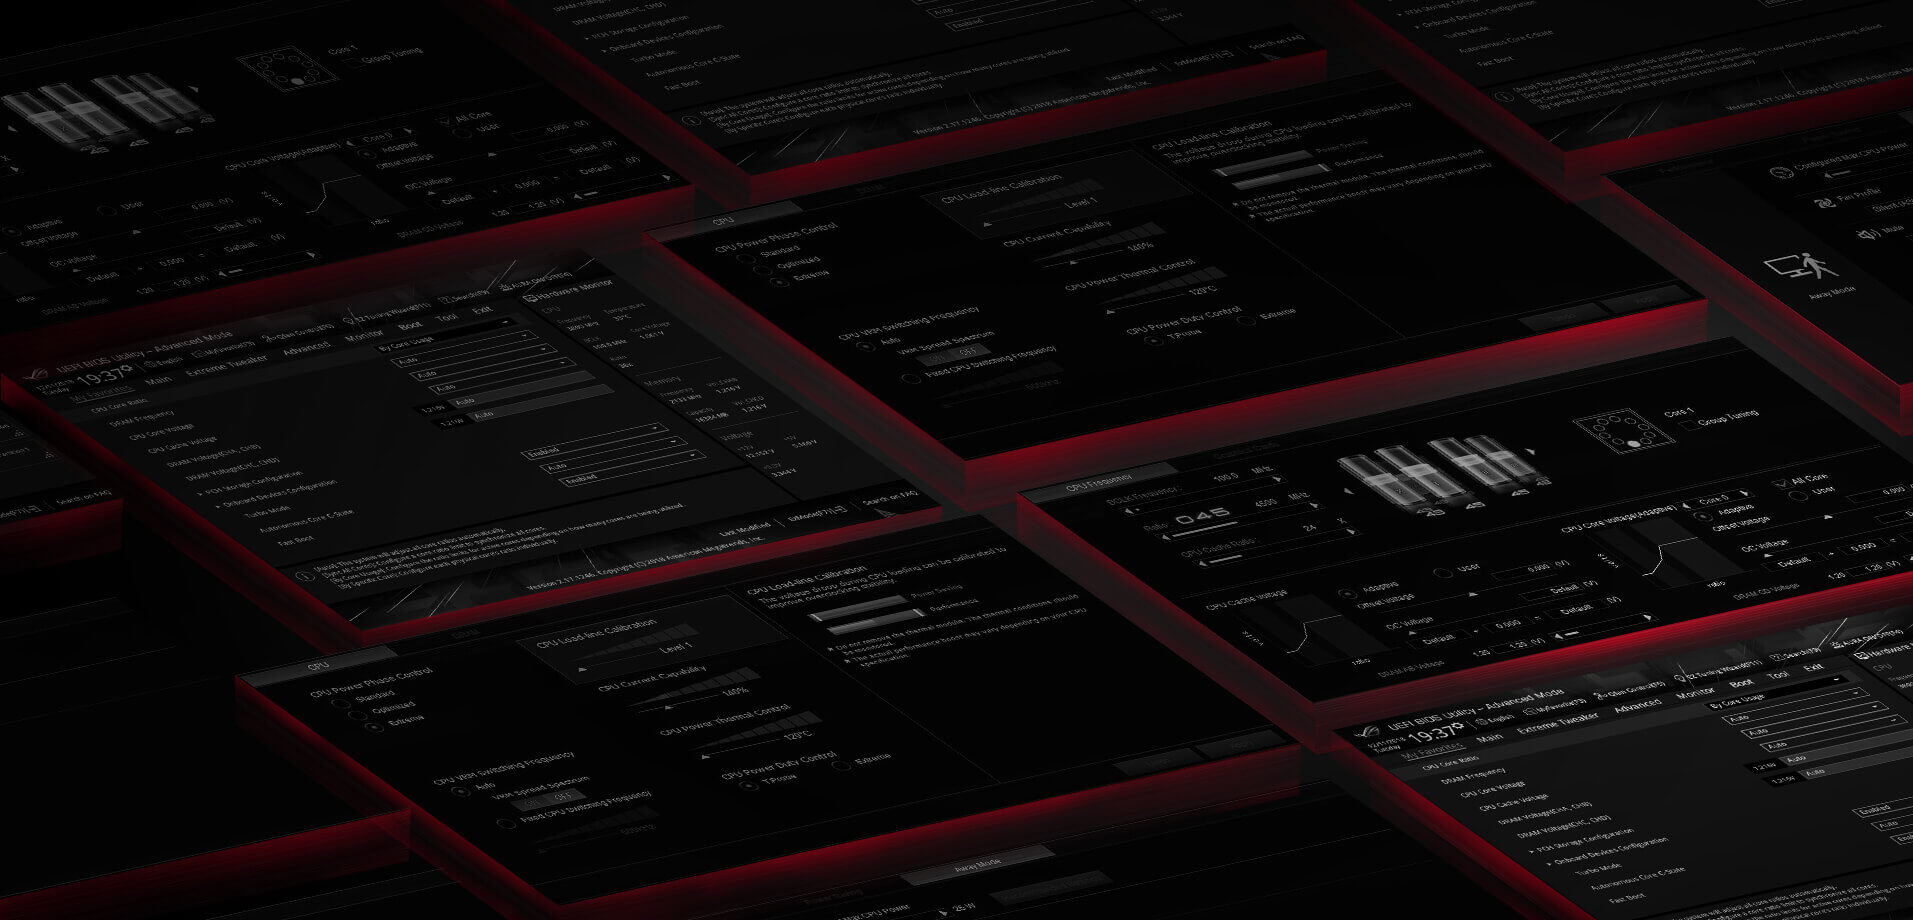 The software UI overview of ROG Maximus XIII Apex